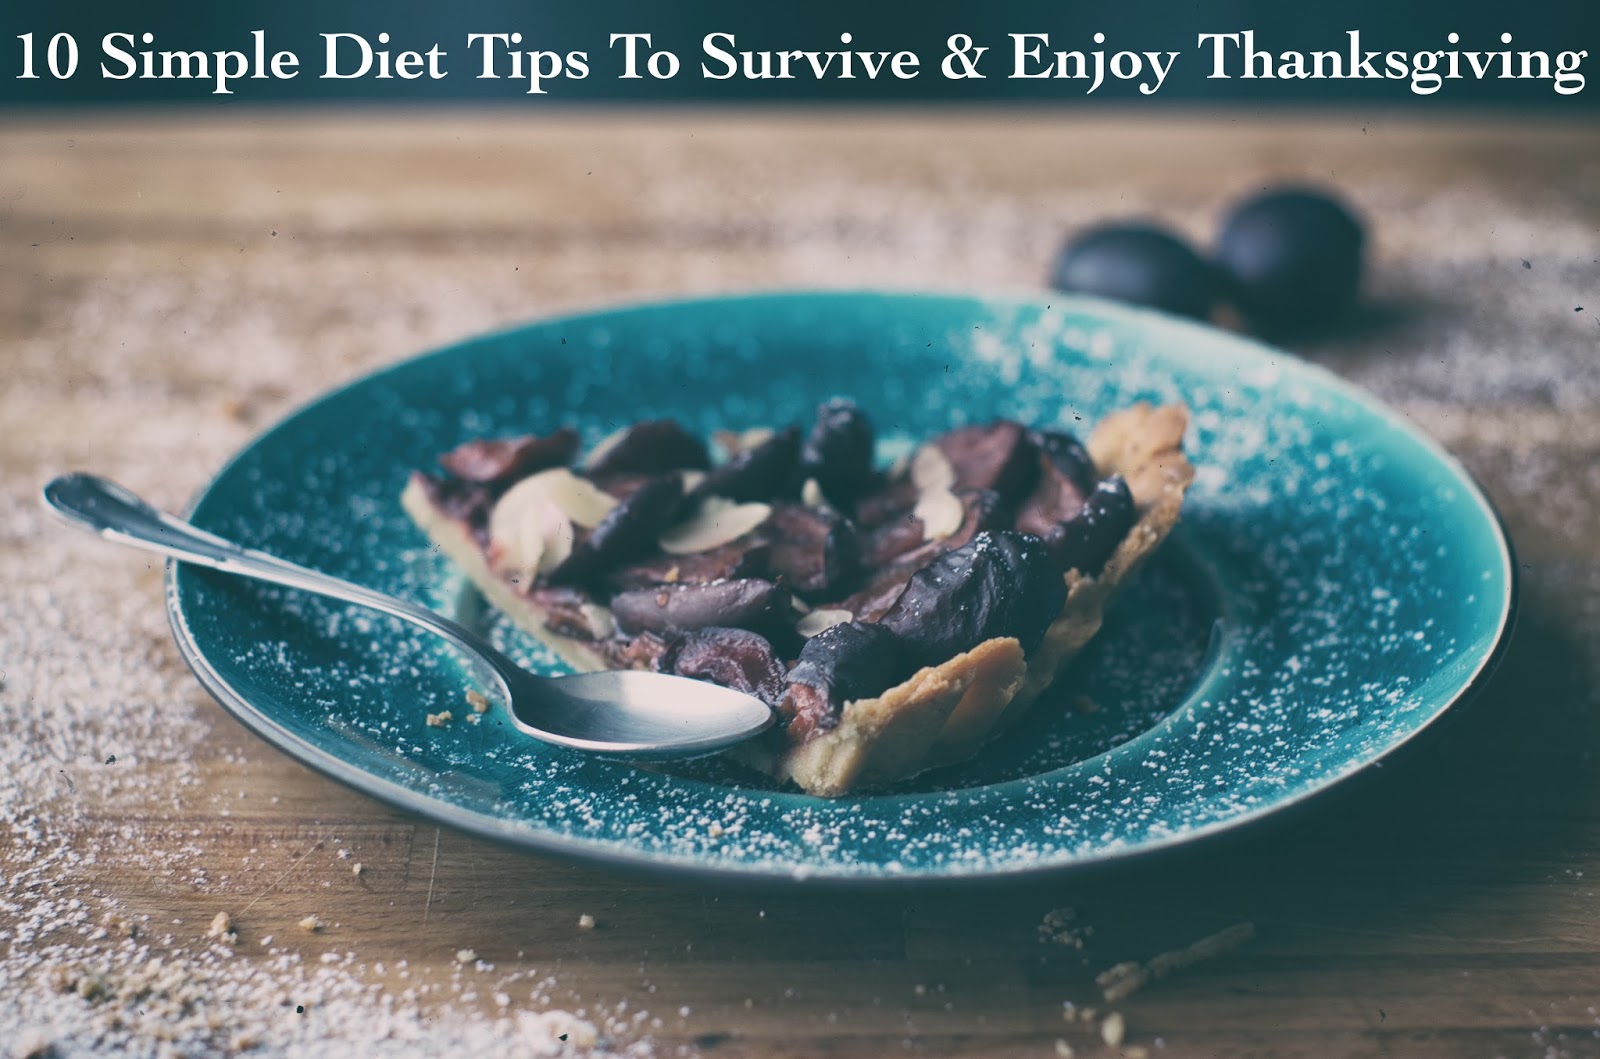 Thanksgiving Diet Tips, HOw To Enjoy Thanksgiving with blowing your diet.